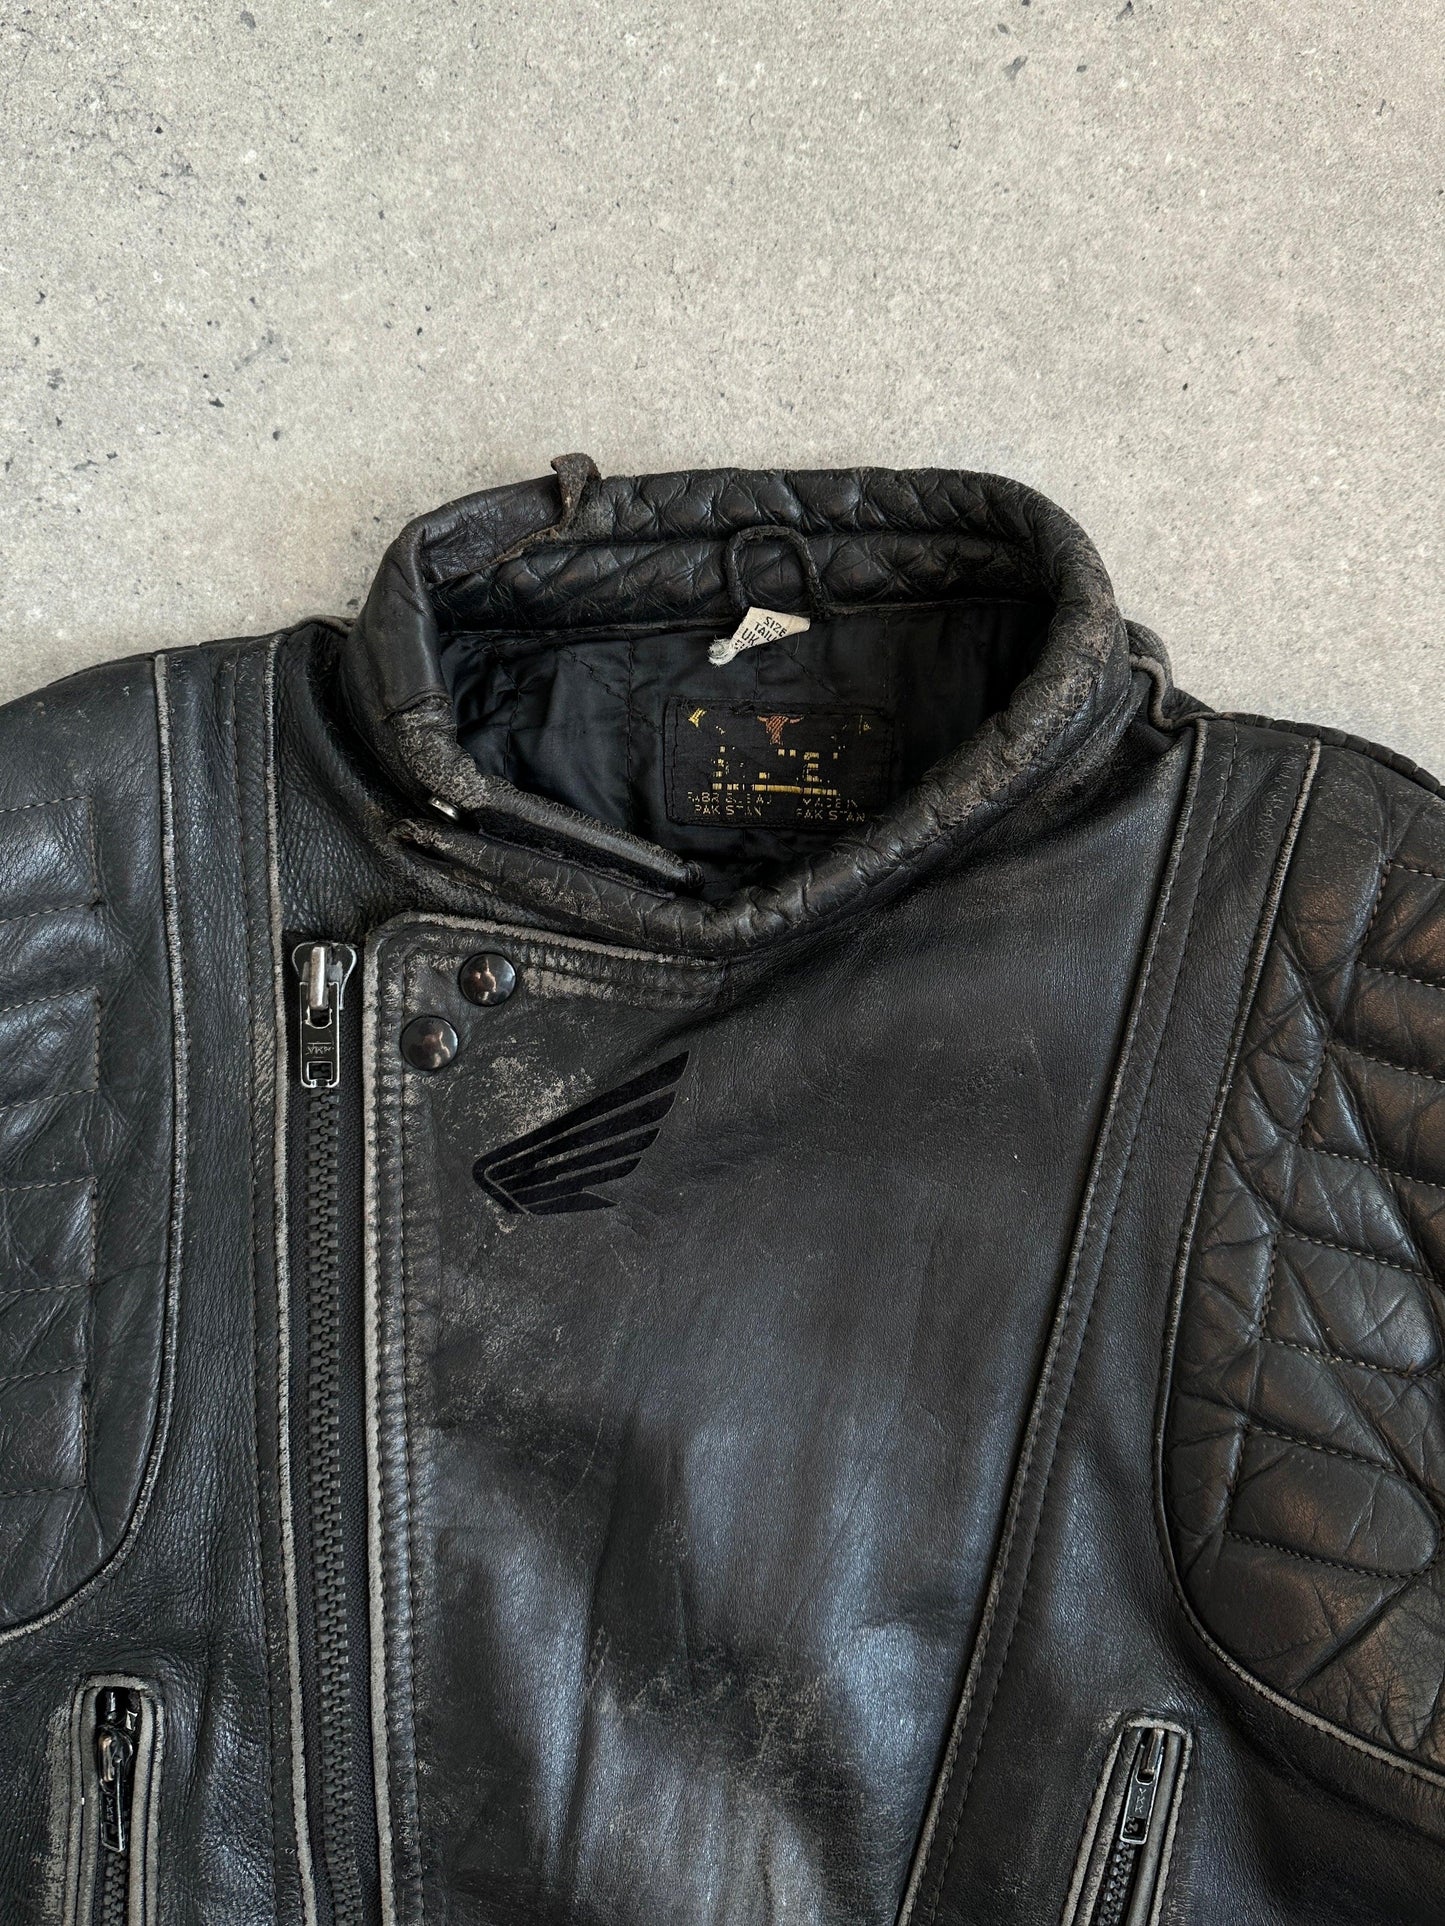 Vintage Motorcycle Distressed Leather Jacket - M/L - Known Source